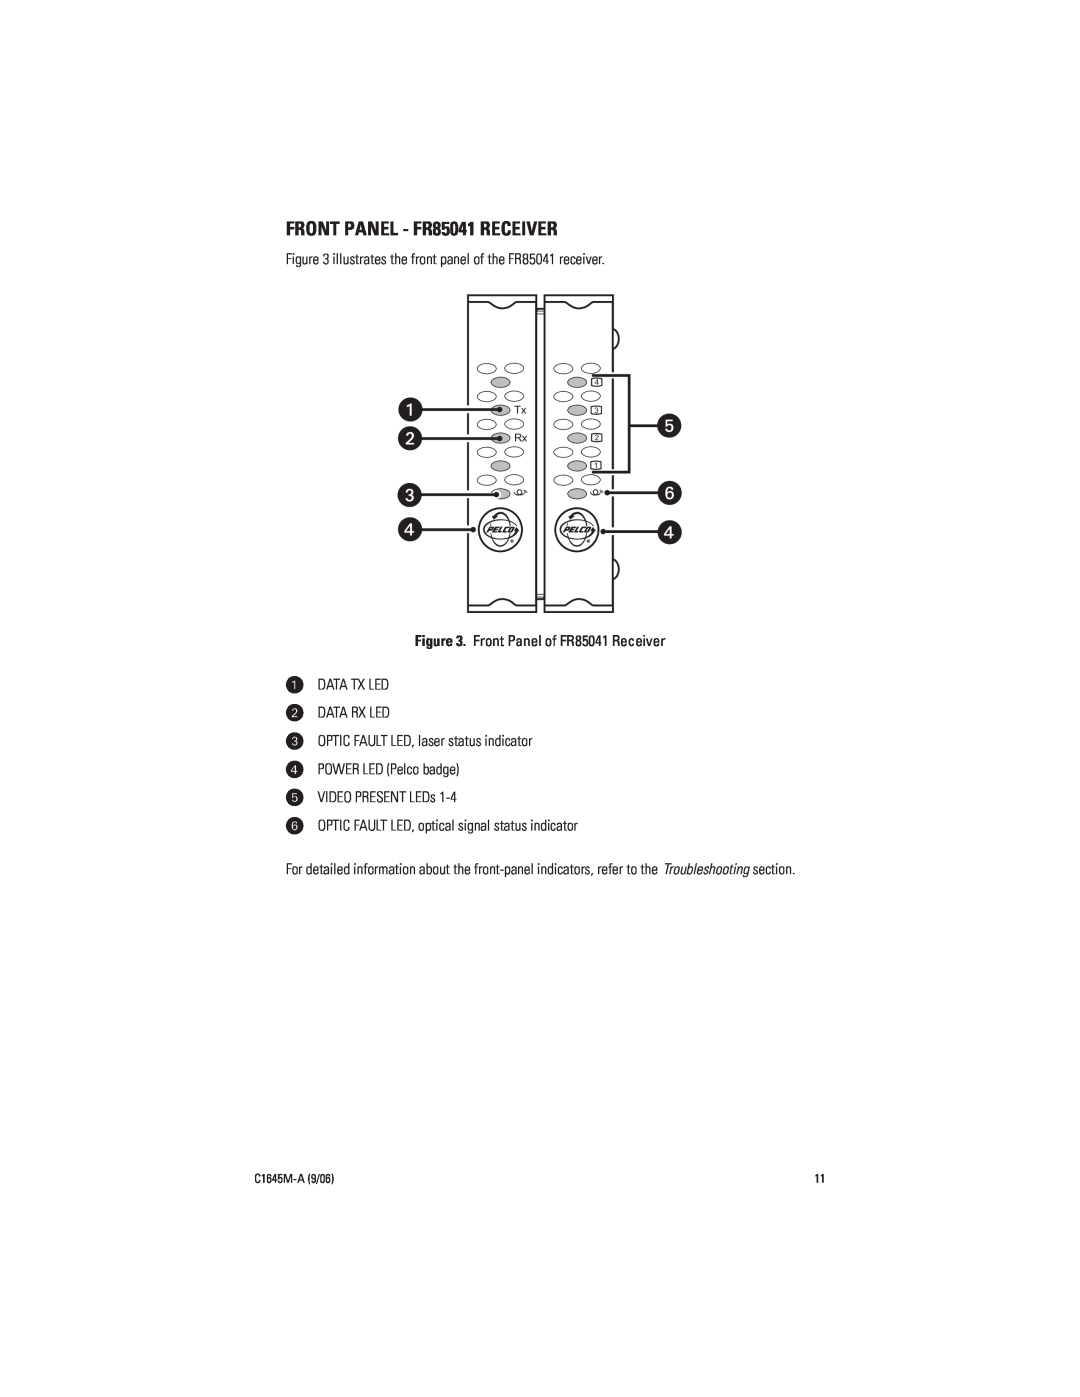 Pelco installation manual FRONT PANEL - FR85041 RECEIVER, Front Panel of FR85041 Receiver, Data Tx Led Data Rx Led 